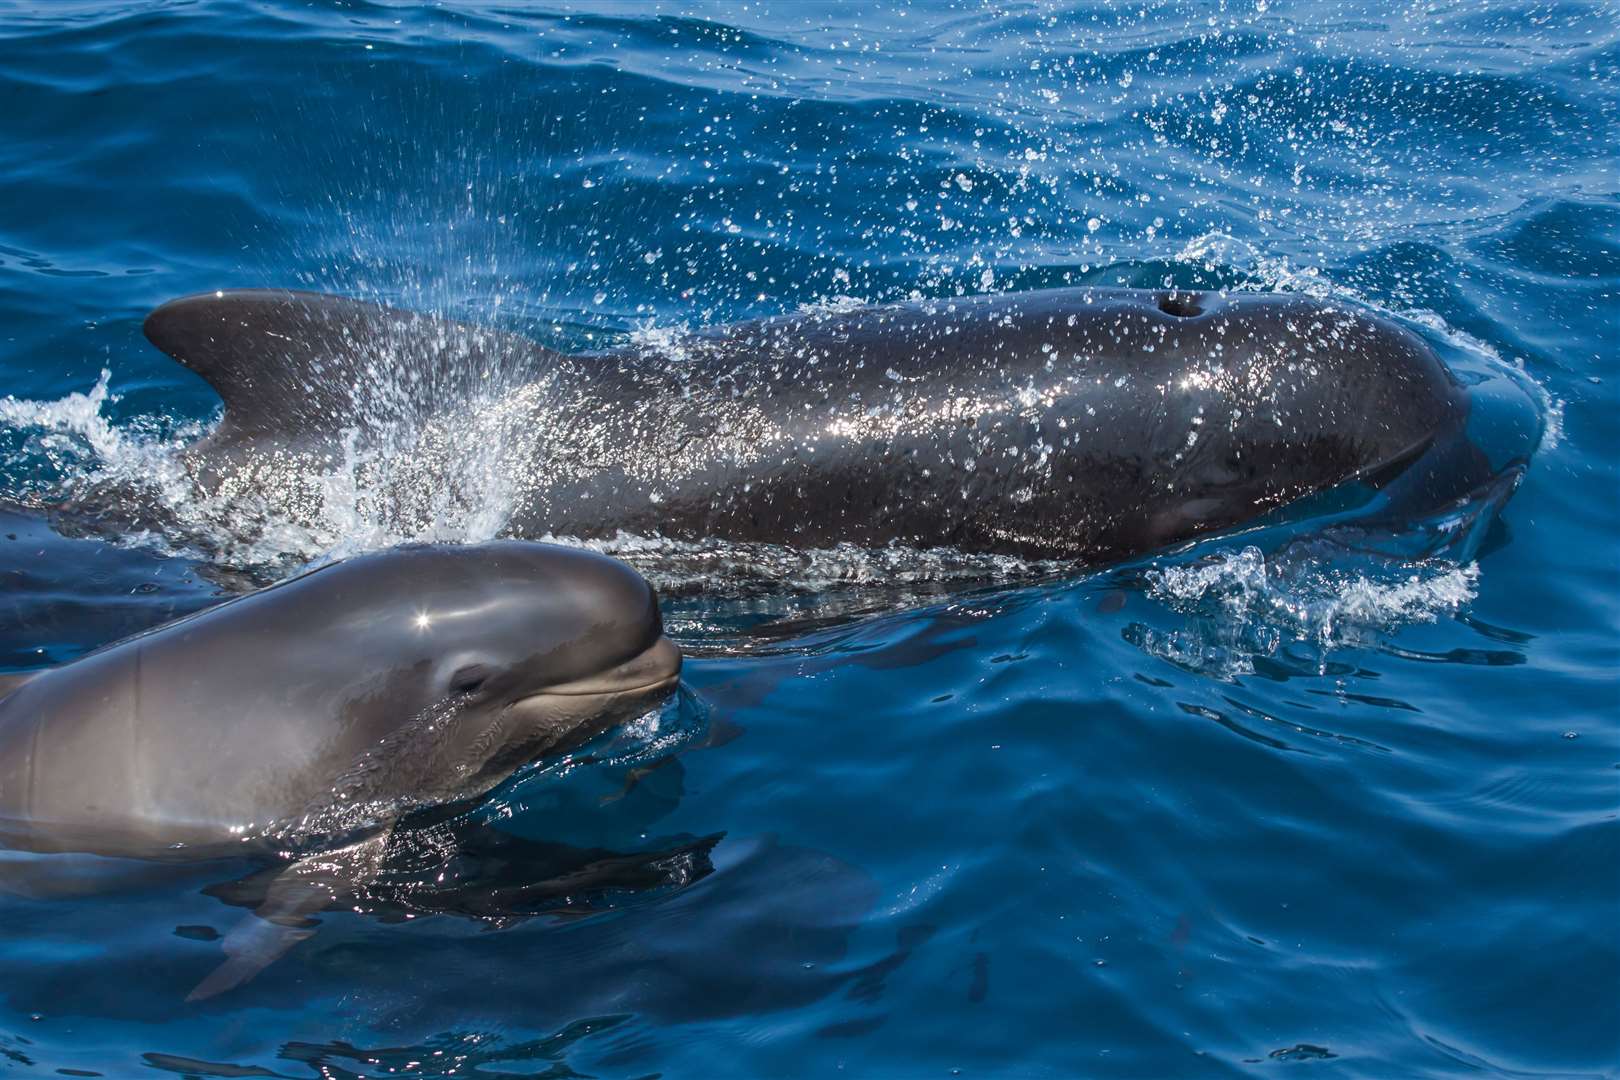 Pilot whales are known to be prone to stranding.